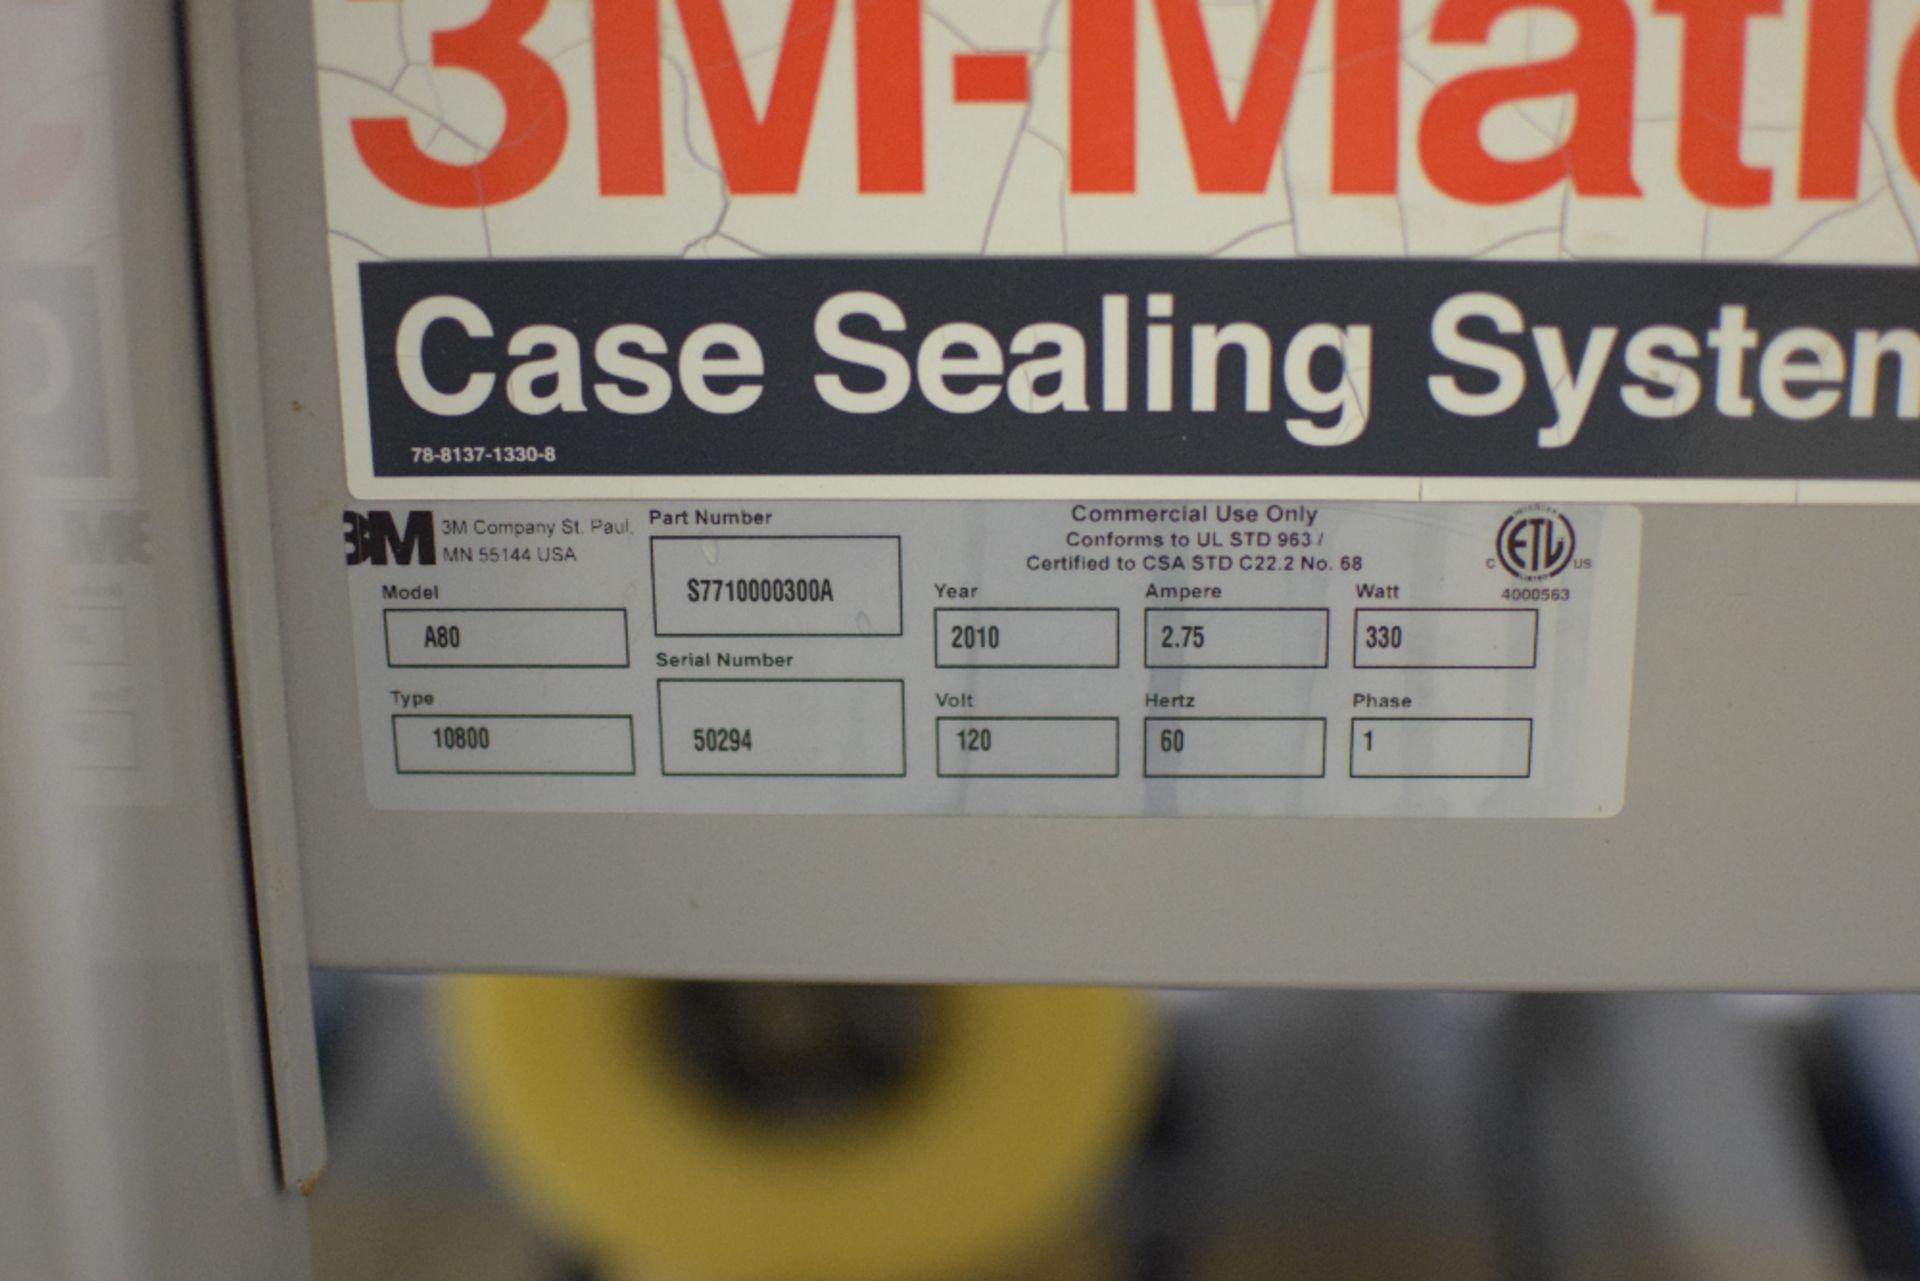 3M-Matic A80 Case Sealing System - Image 4 of 4